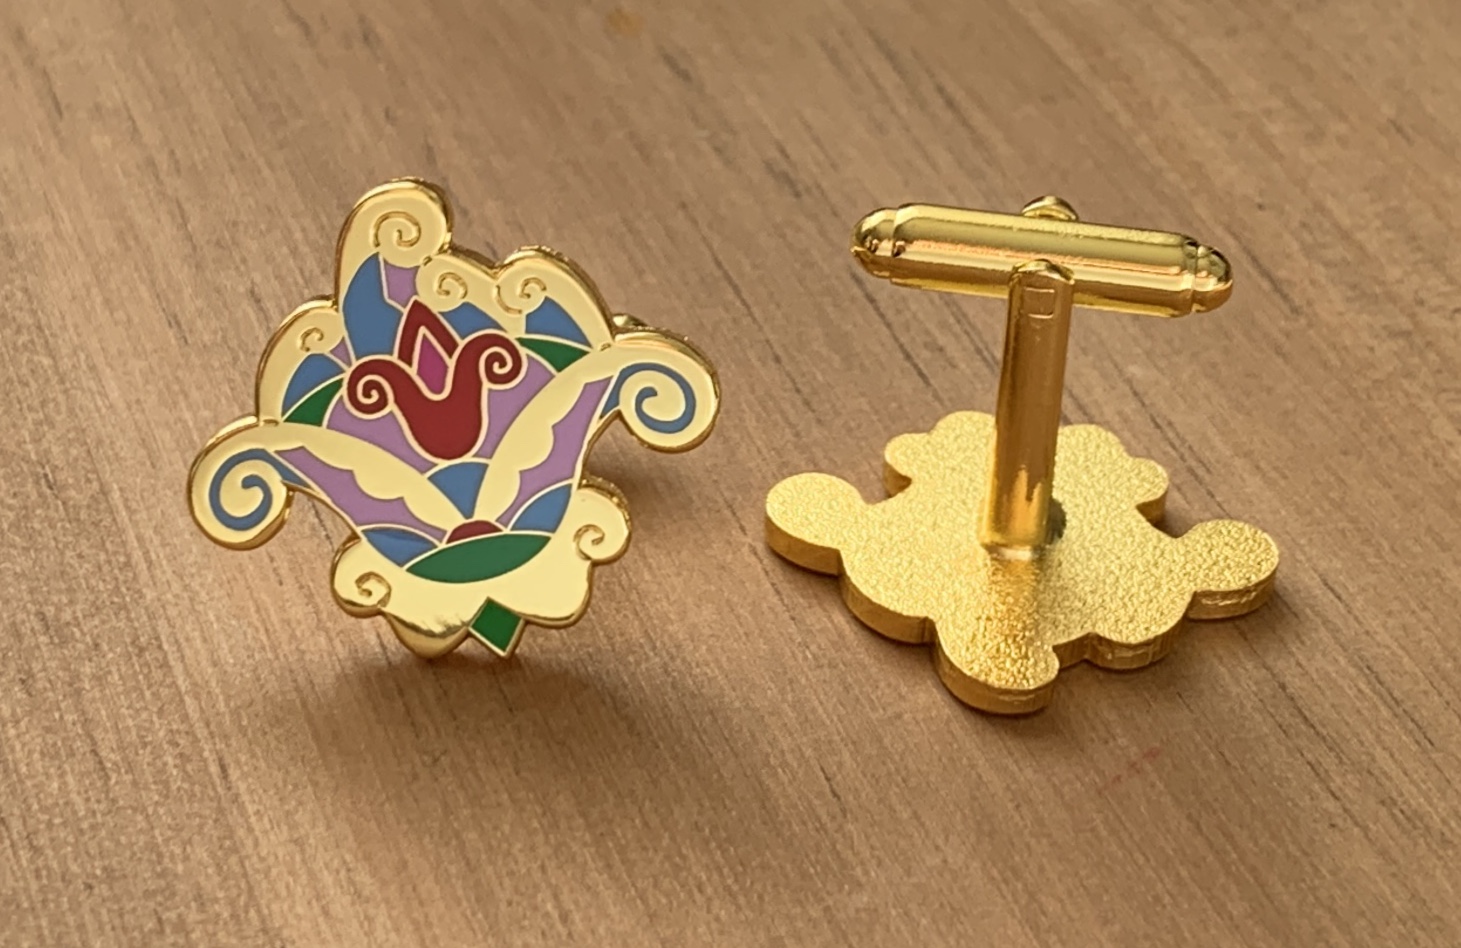 The cufflinks with the motif of slavic blossom